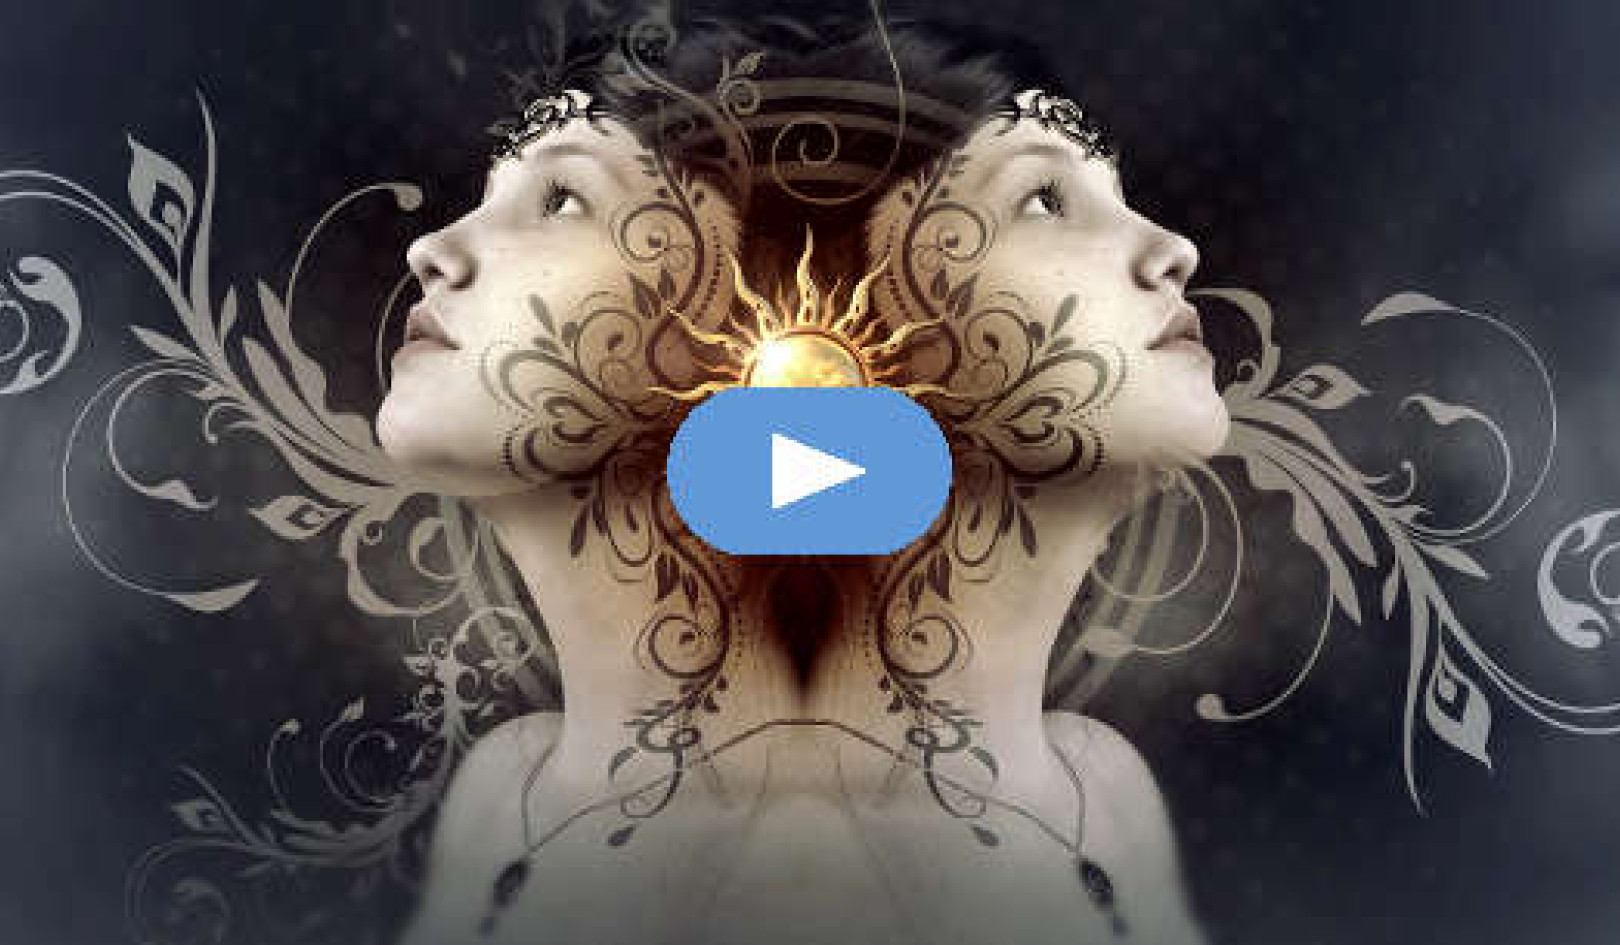 Beyond Our Perspective: Our Perception Comes from Our Perspective (Video)